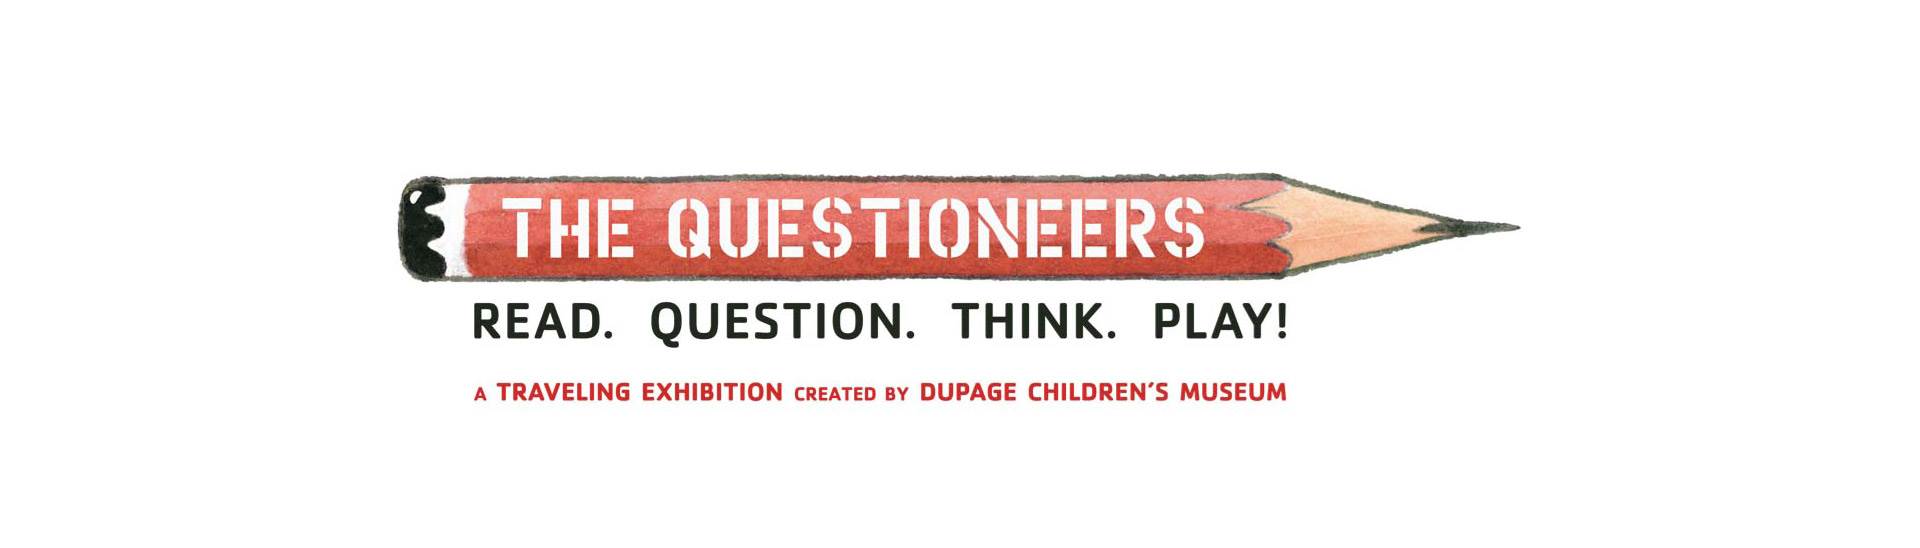 The Questioneers